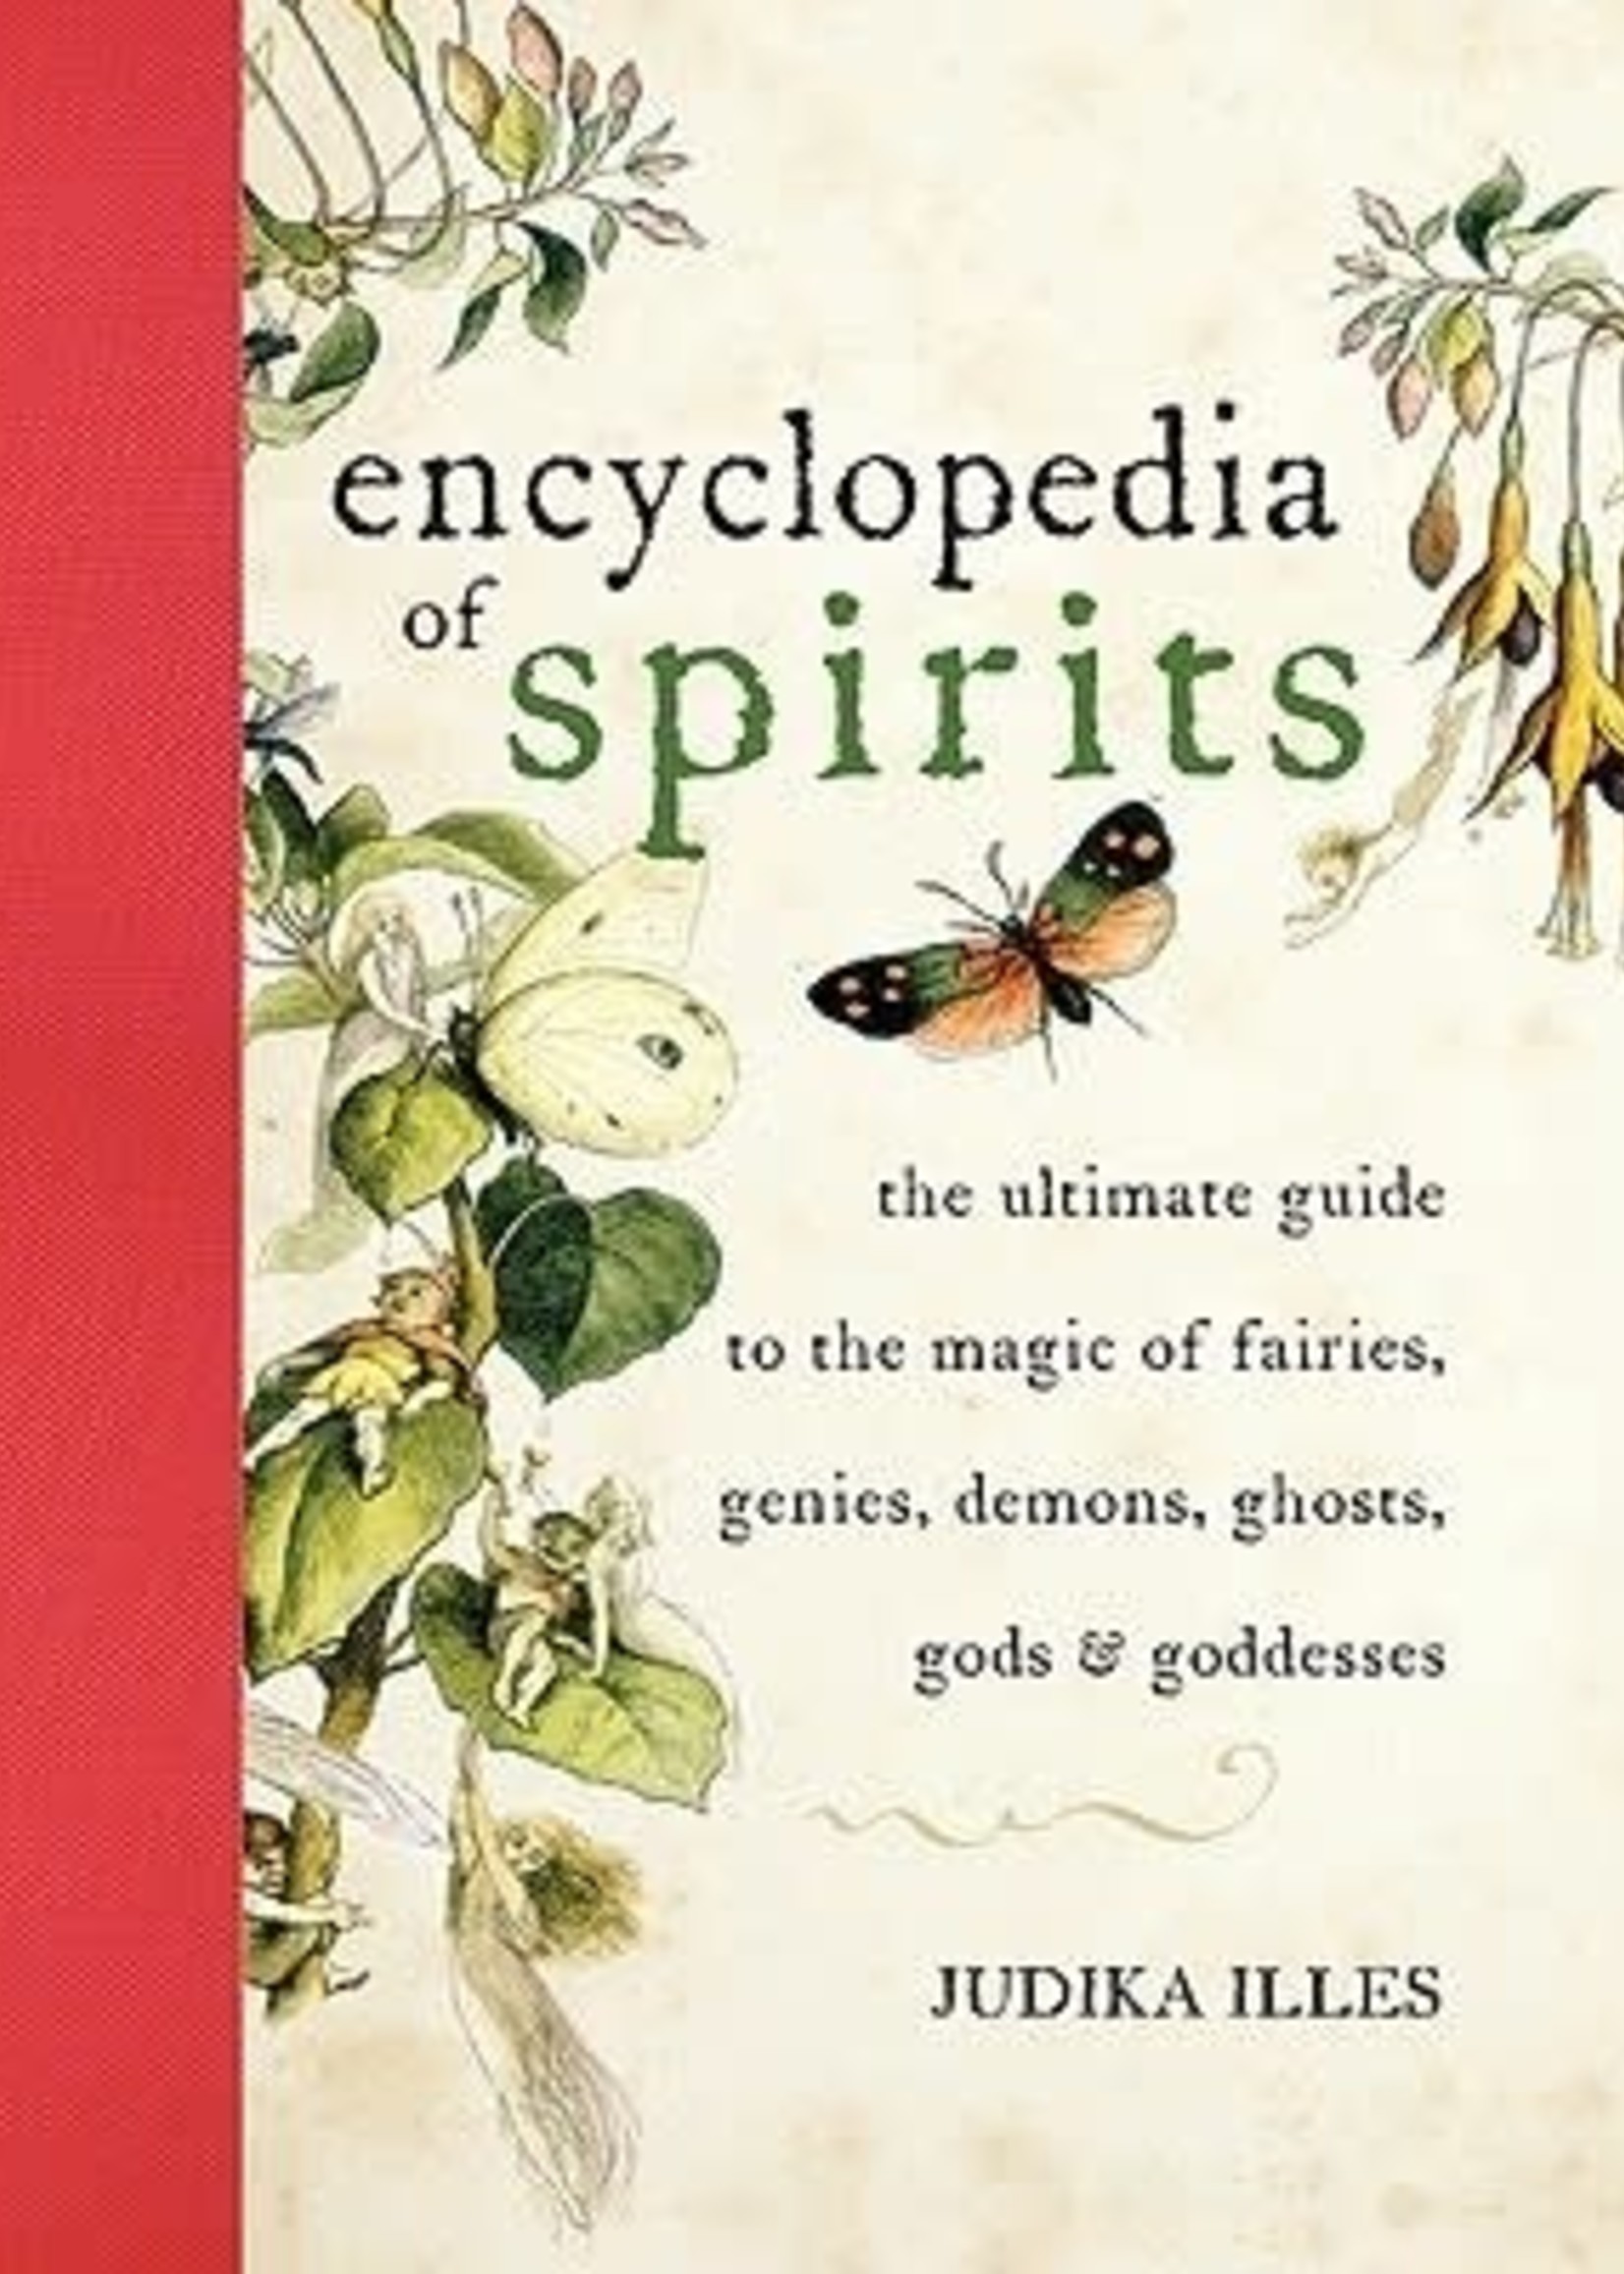 Encyclopedia of Spirits: The Ultimate Guide to the Magic of Fairies, Genies, Demons, Ghosts, Gods Goddesses by Judika Illes